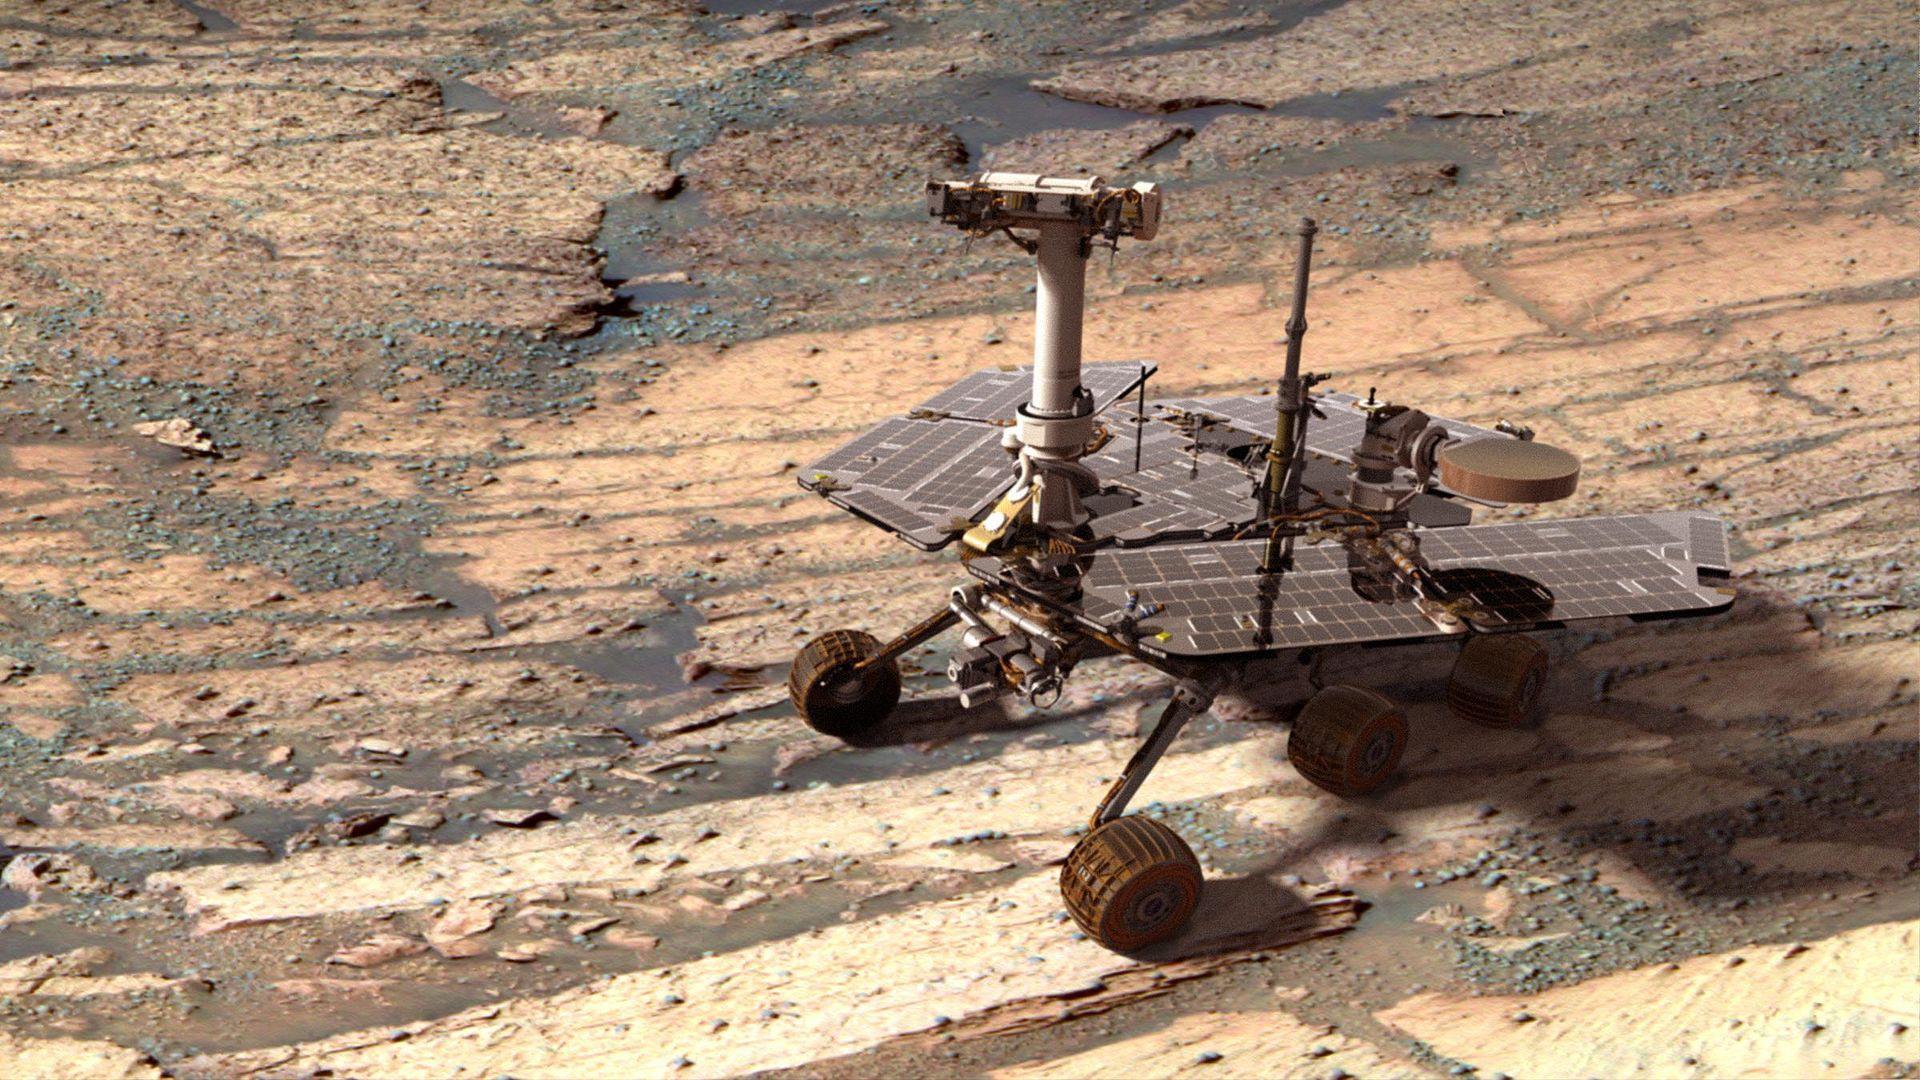 NASA Considering Options To Save Opportunity Rover